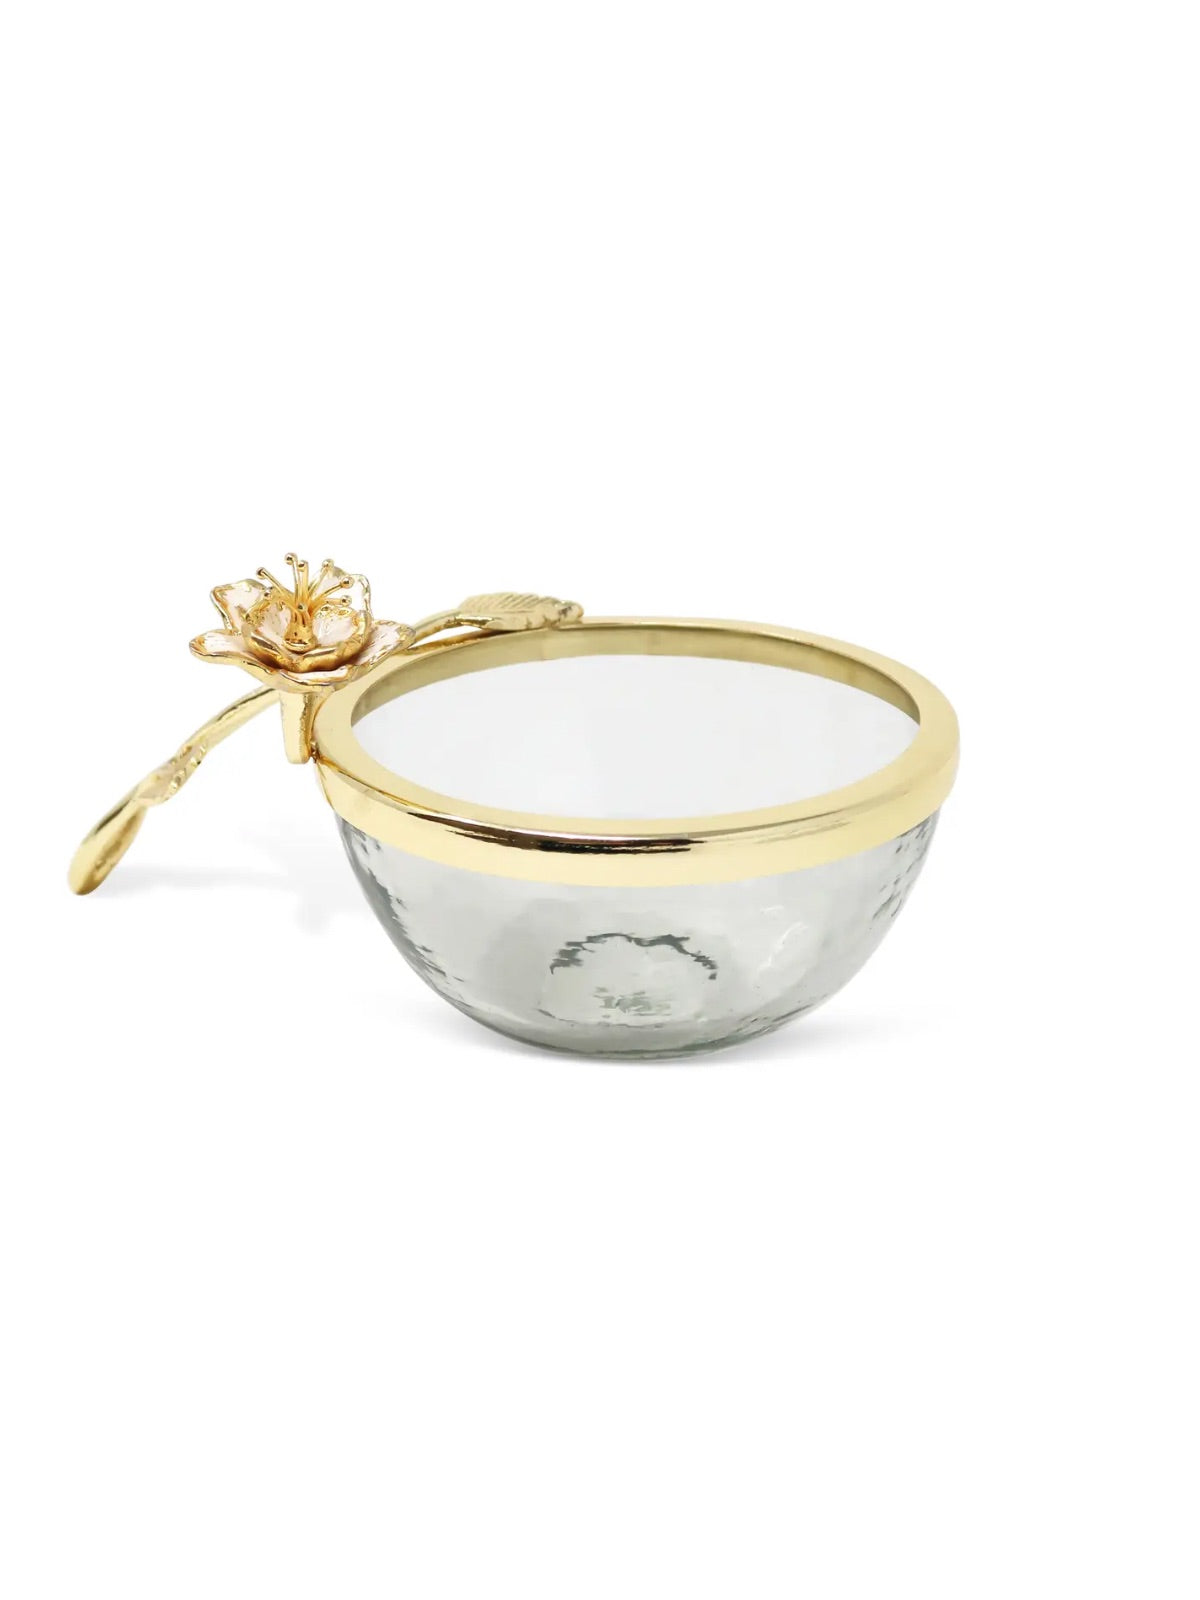 Glass Bowl Adorned with a White and Gold Enamel Flower Design on Handle.